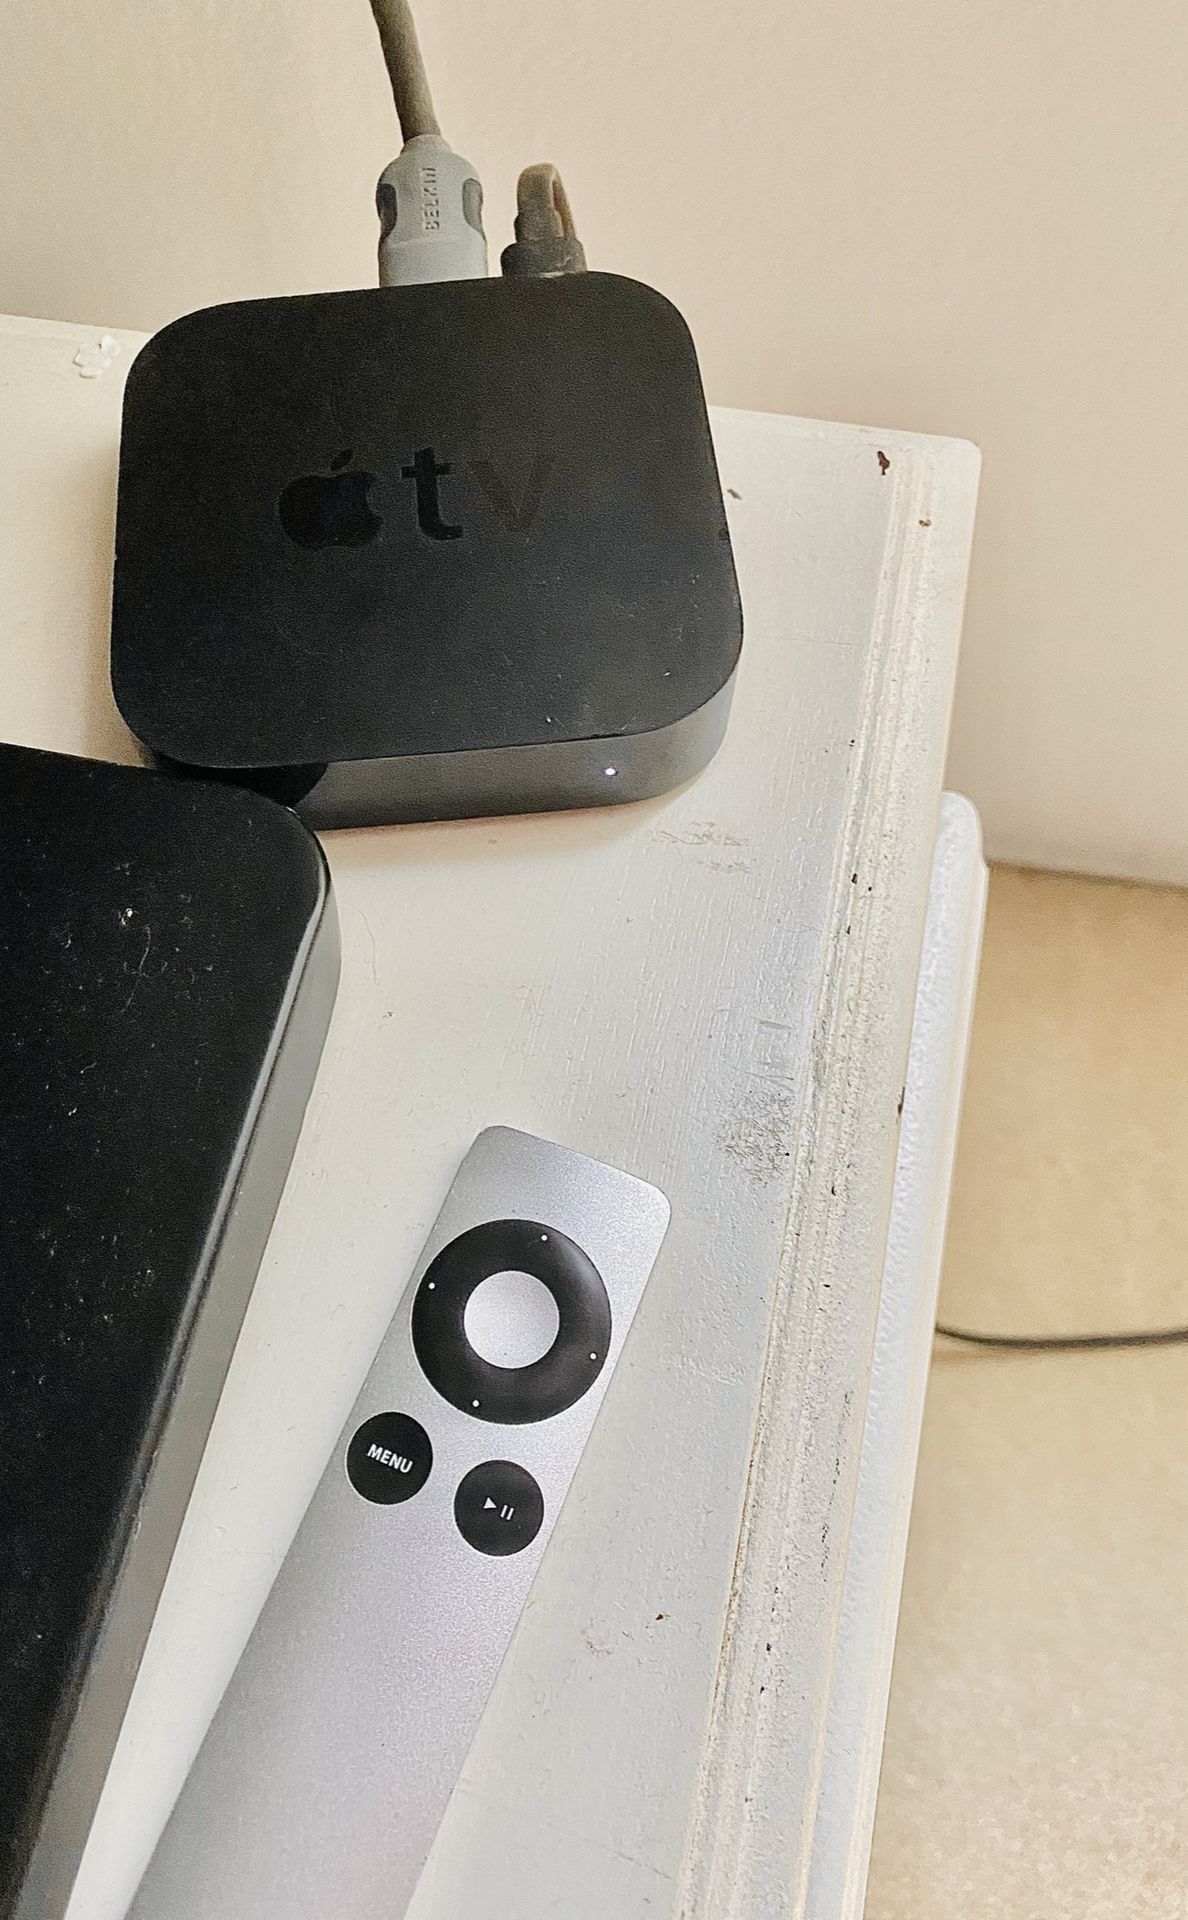 Apple TV 3rd Generation Works Great! 8gb 